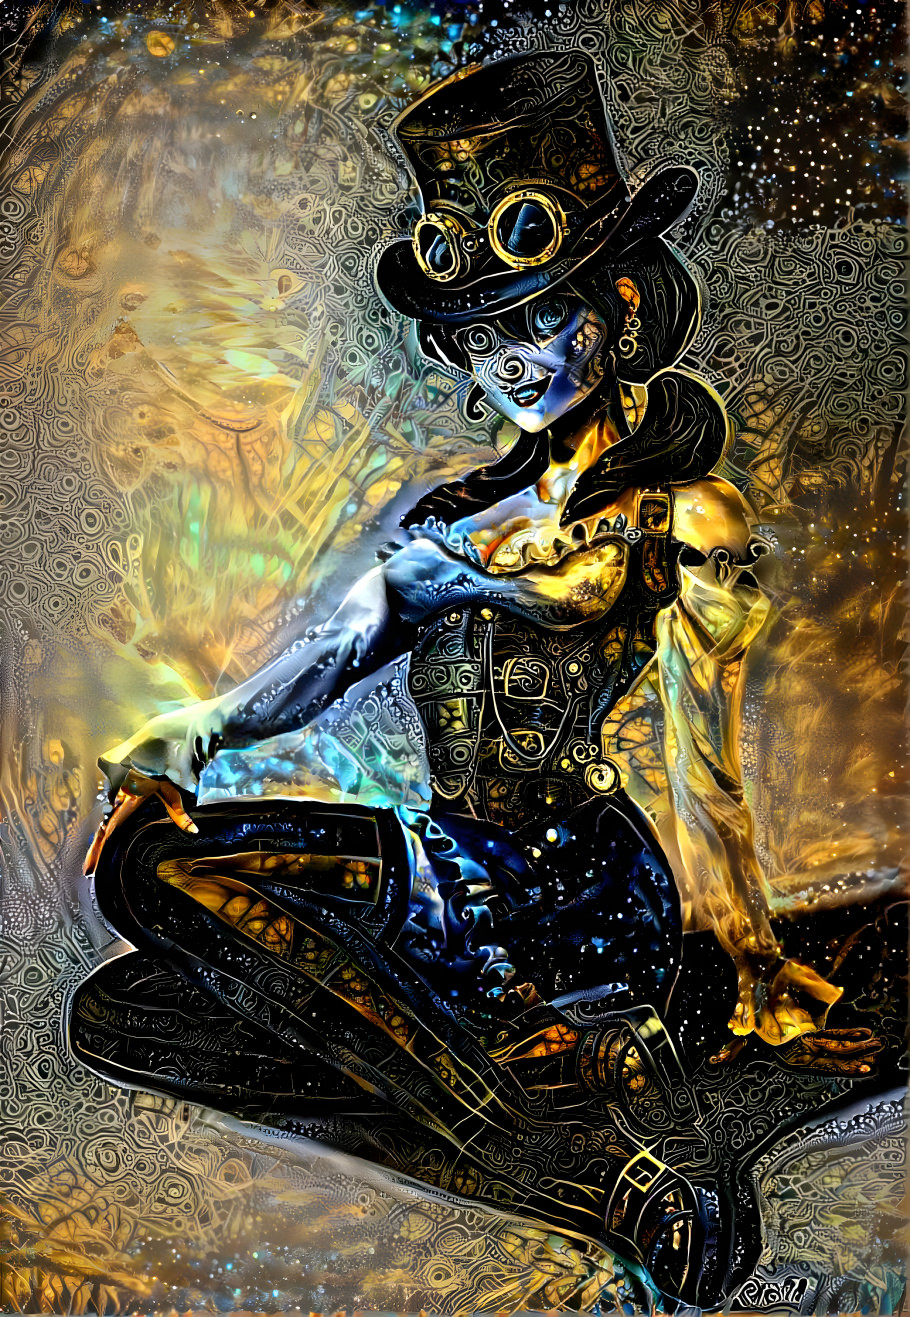 Steampunk Pin Up - Renee Chio 